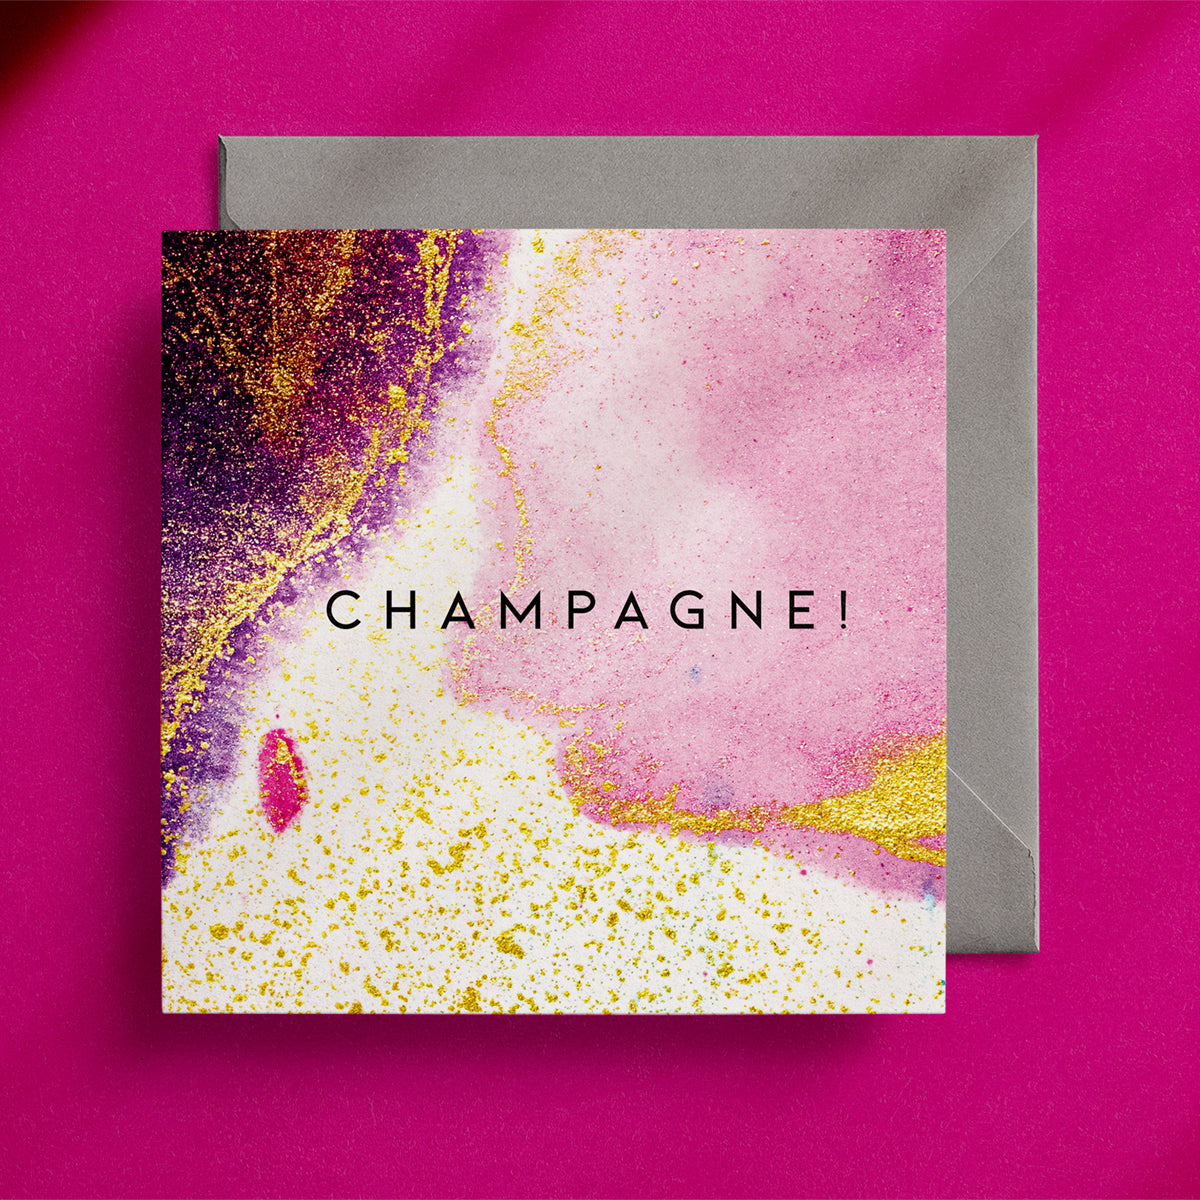 Champagne! - ABSTRACT Greeting Card